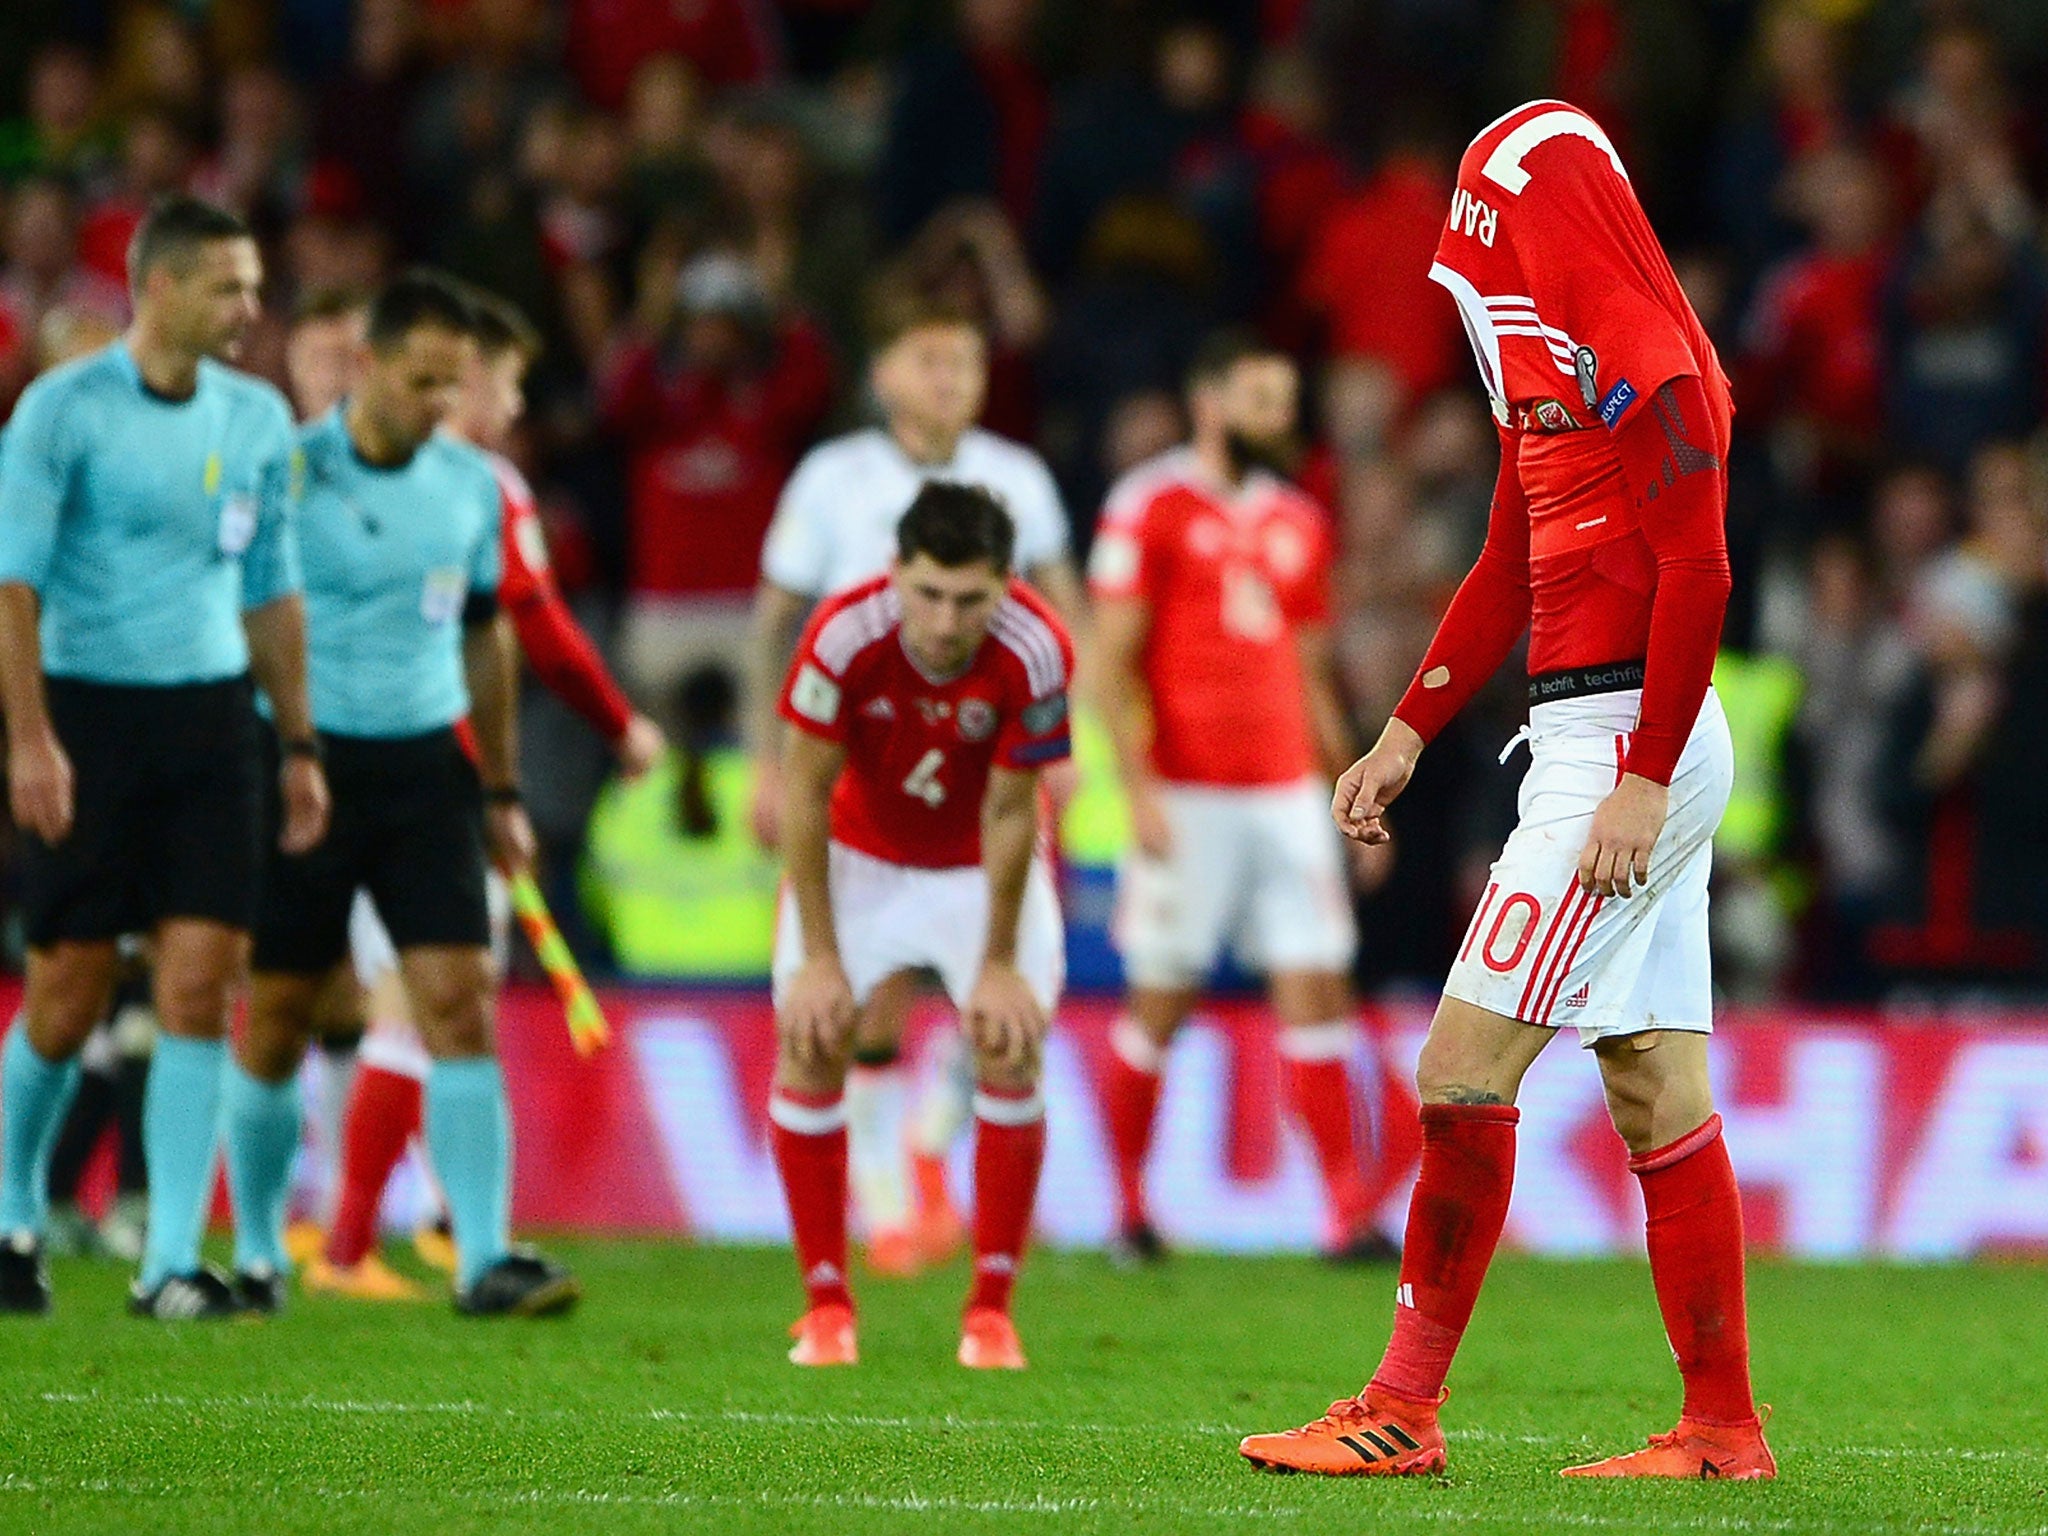 &#13;
Wales failed to qualify for next summer's World Cup &#13;